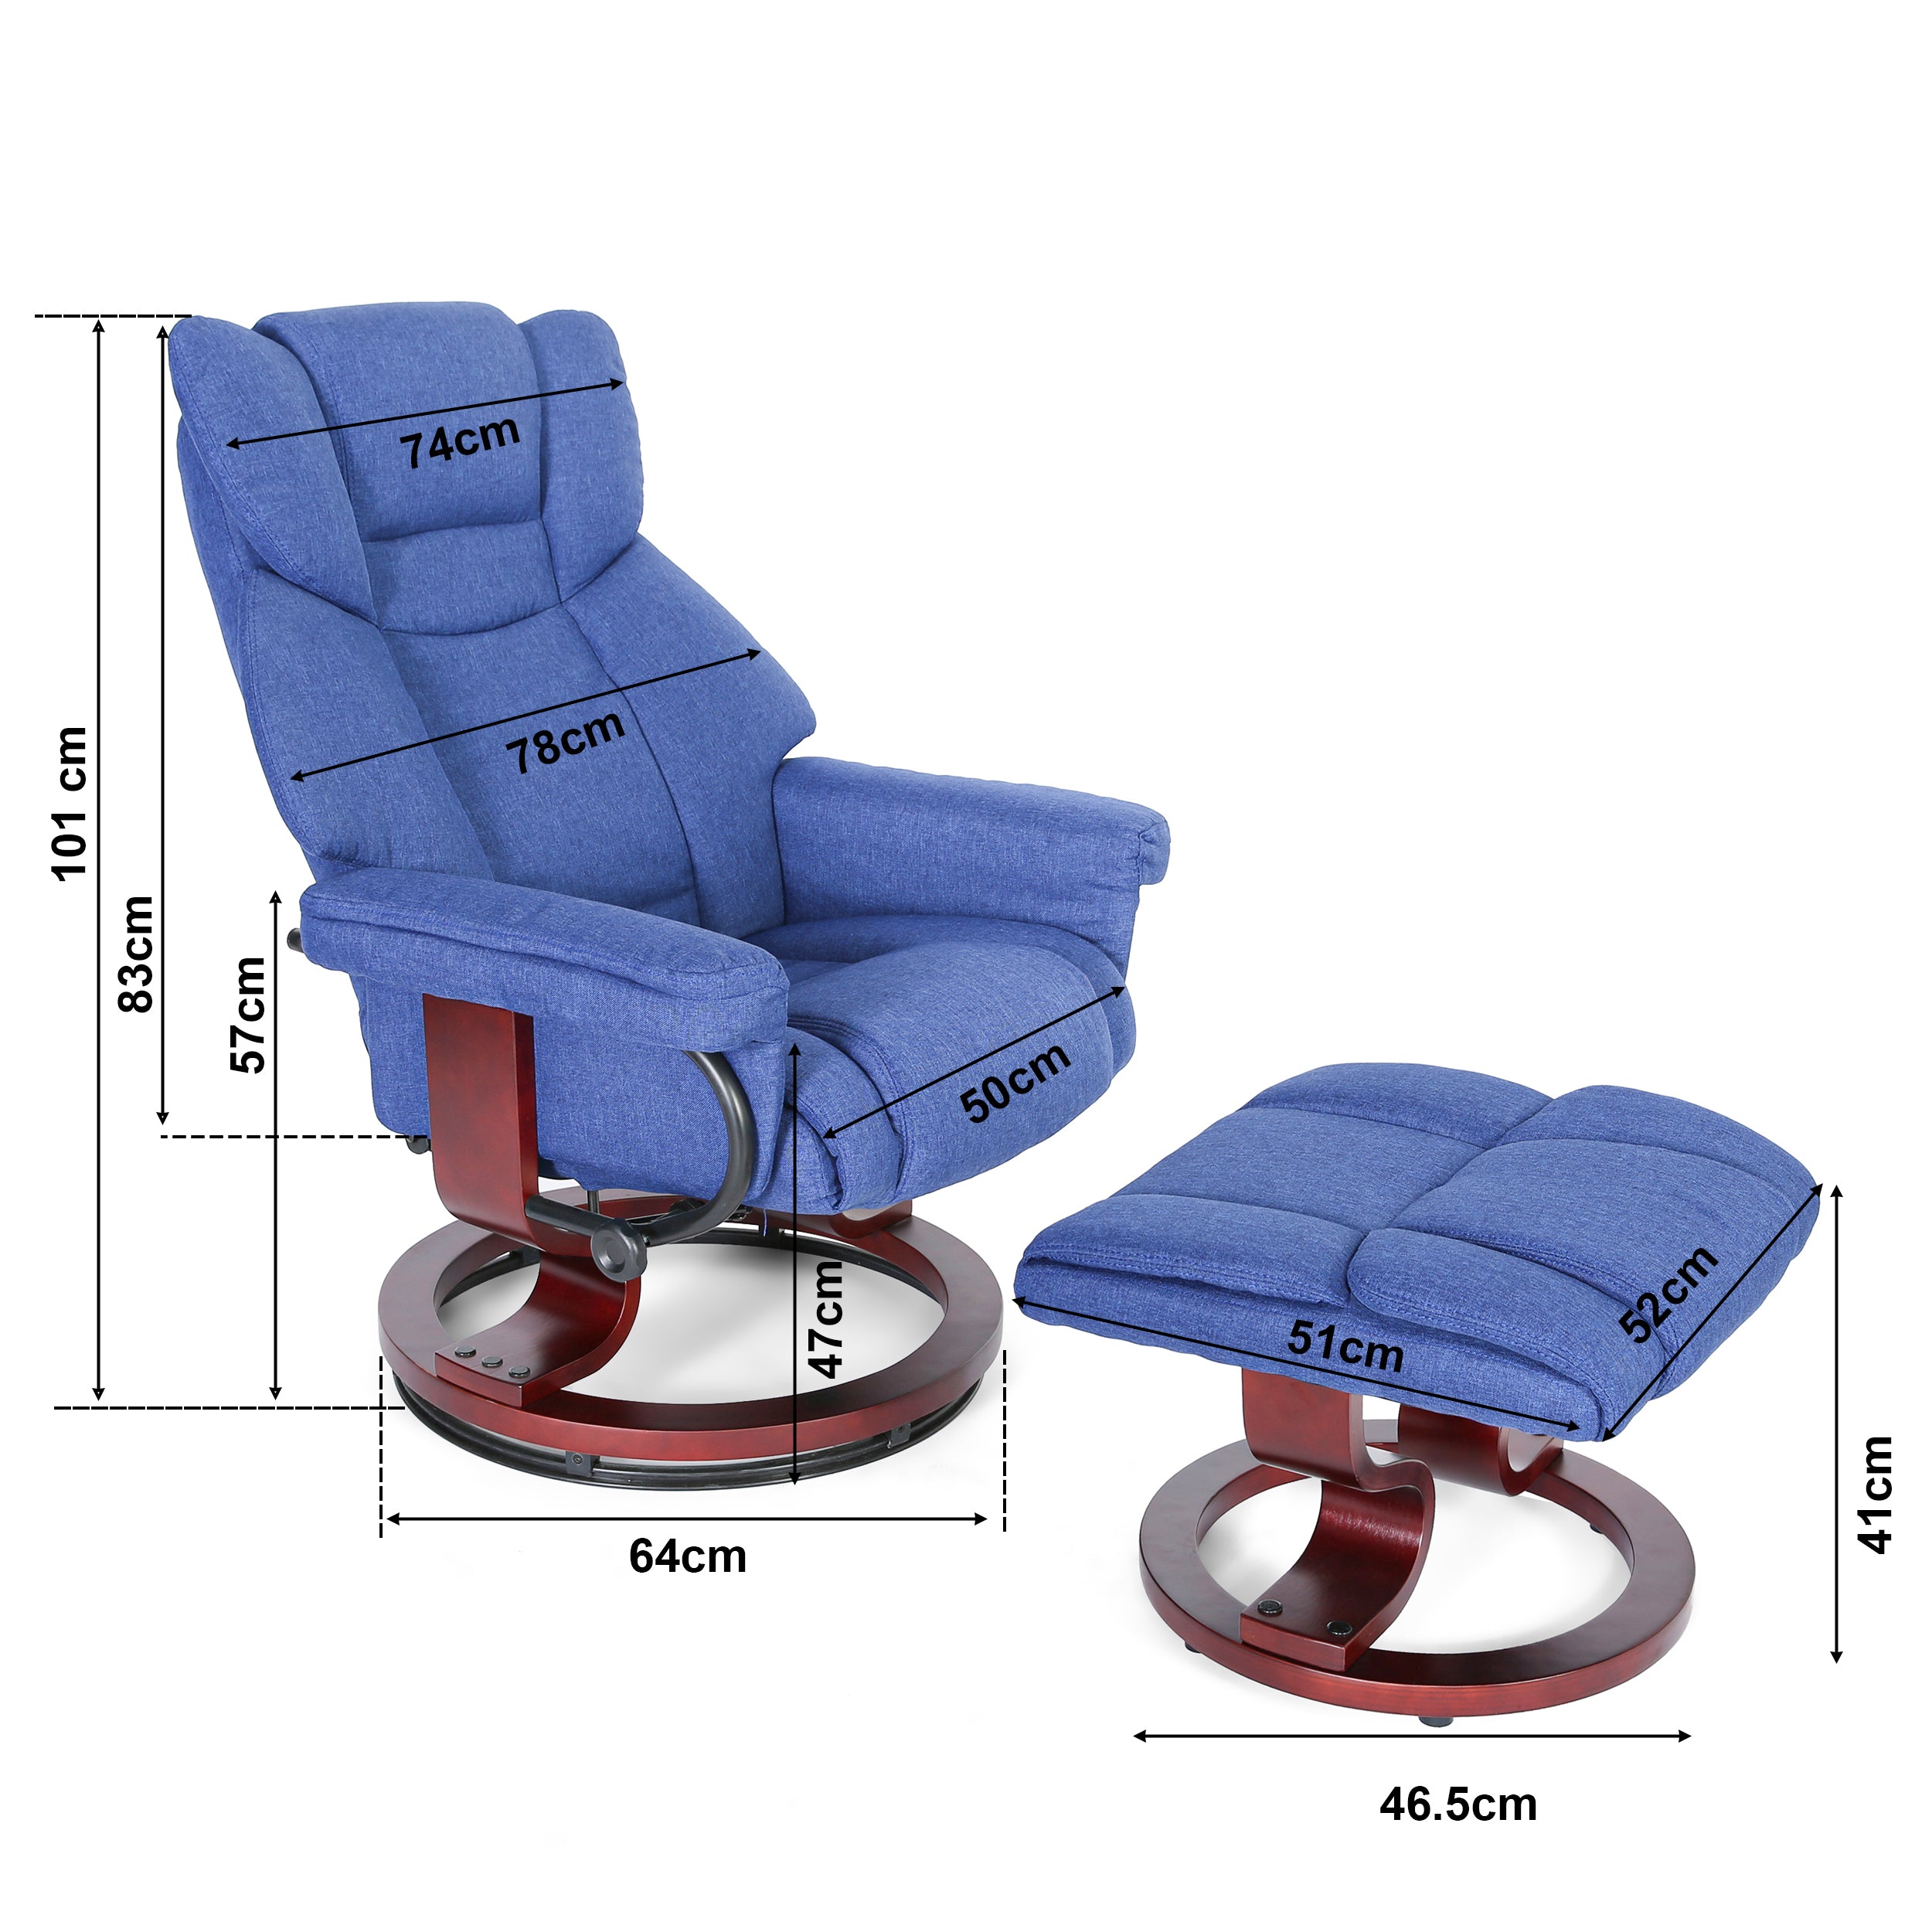 Blisswood Swivel Recliner Arm Chair With Footstool